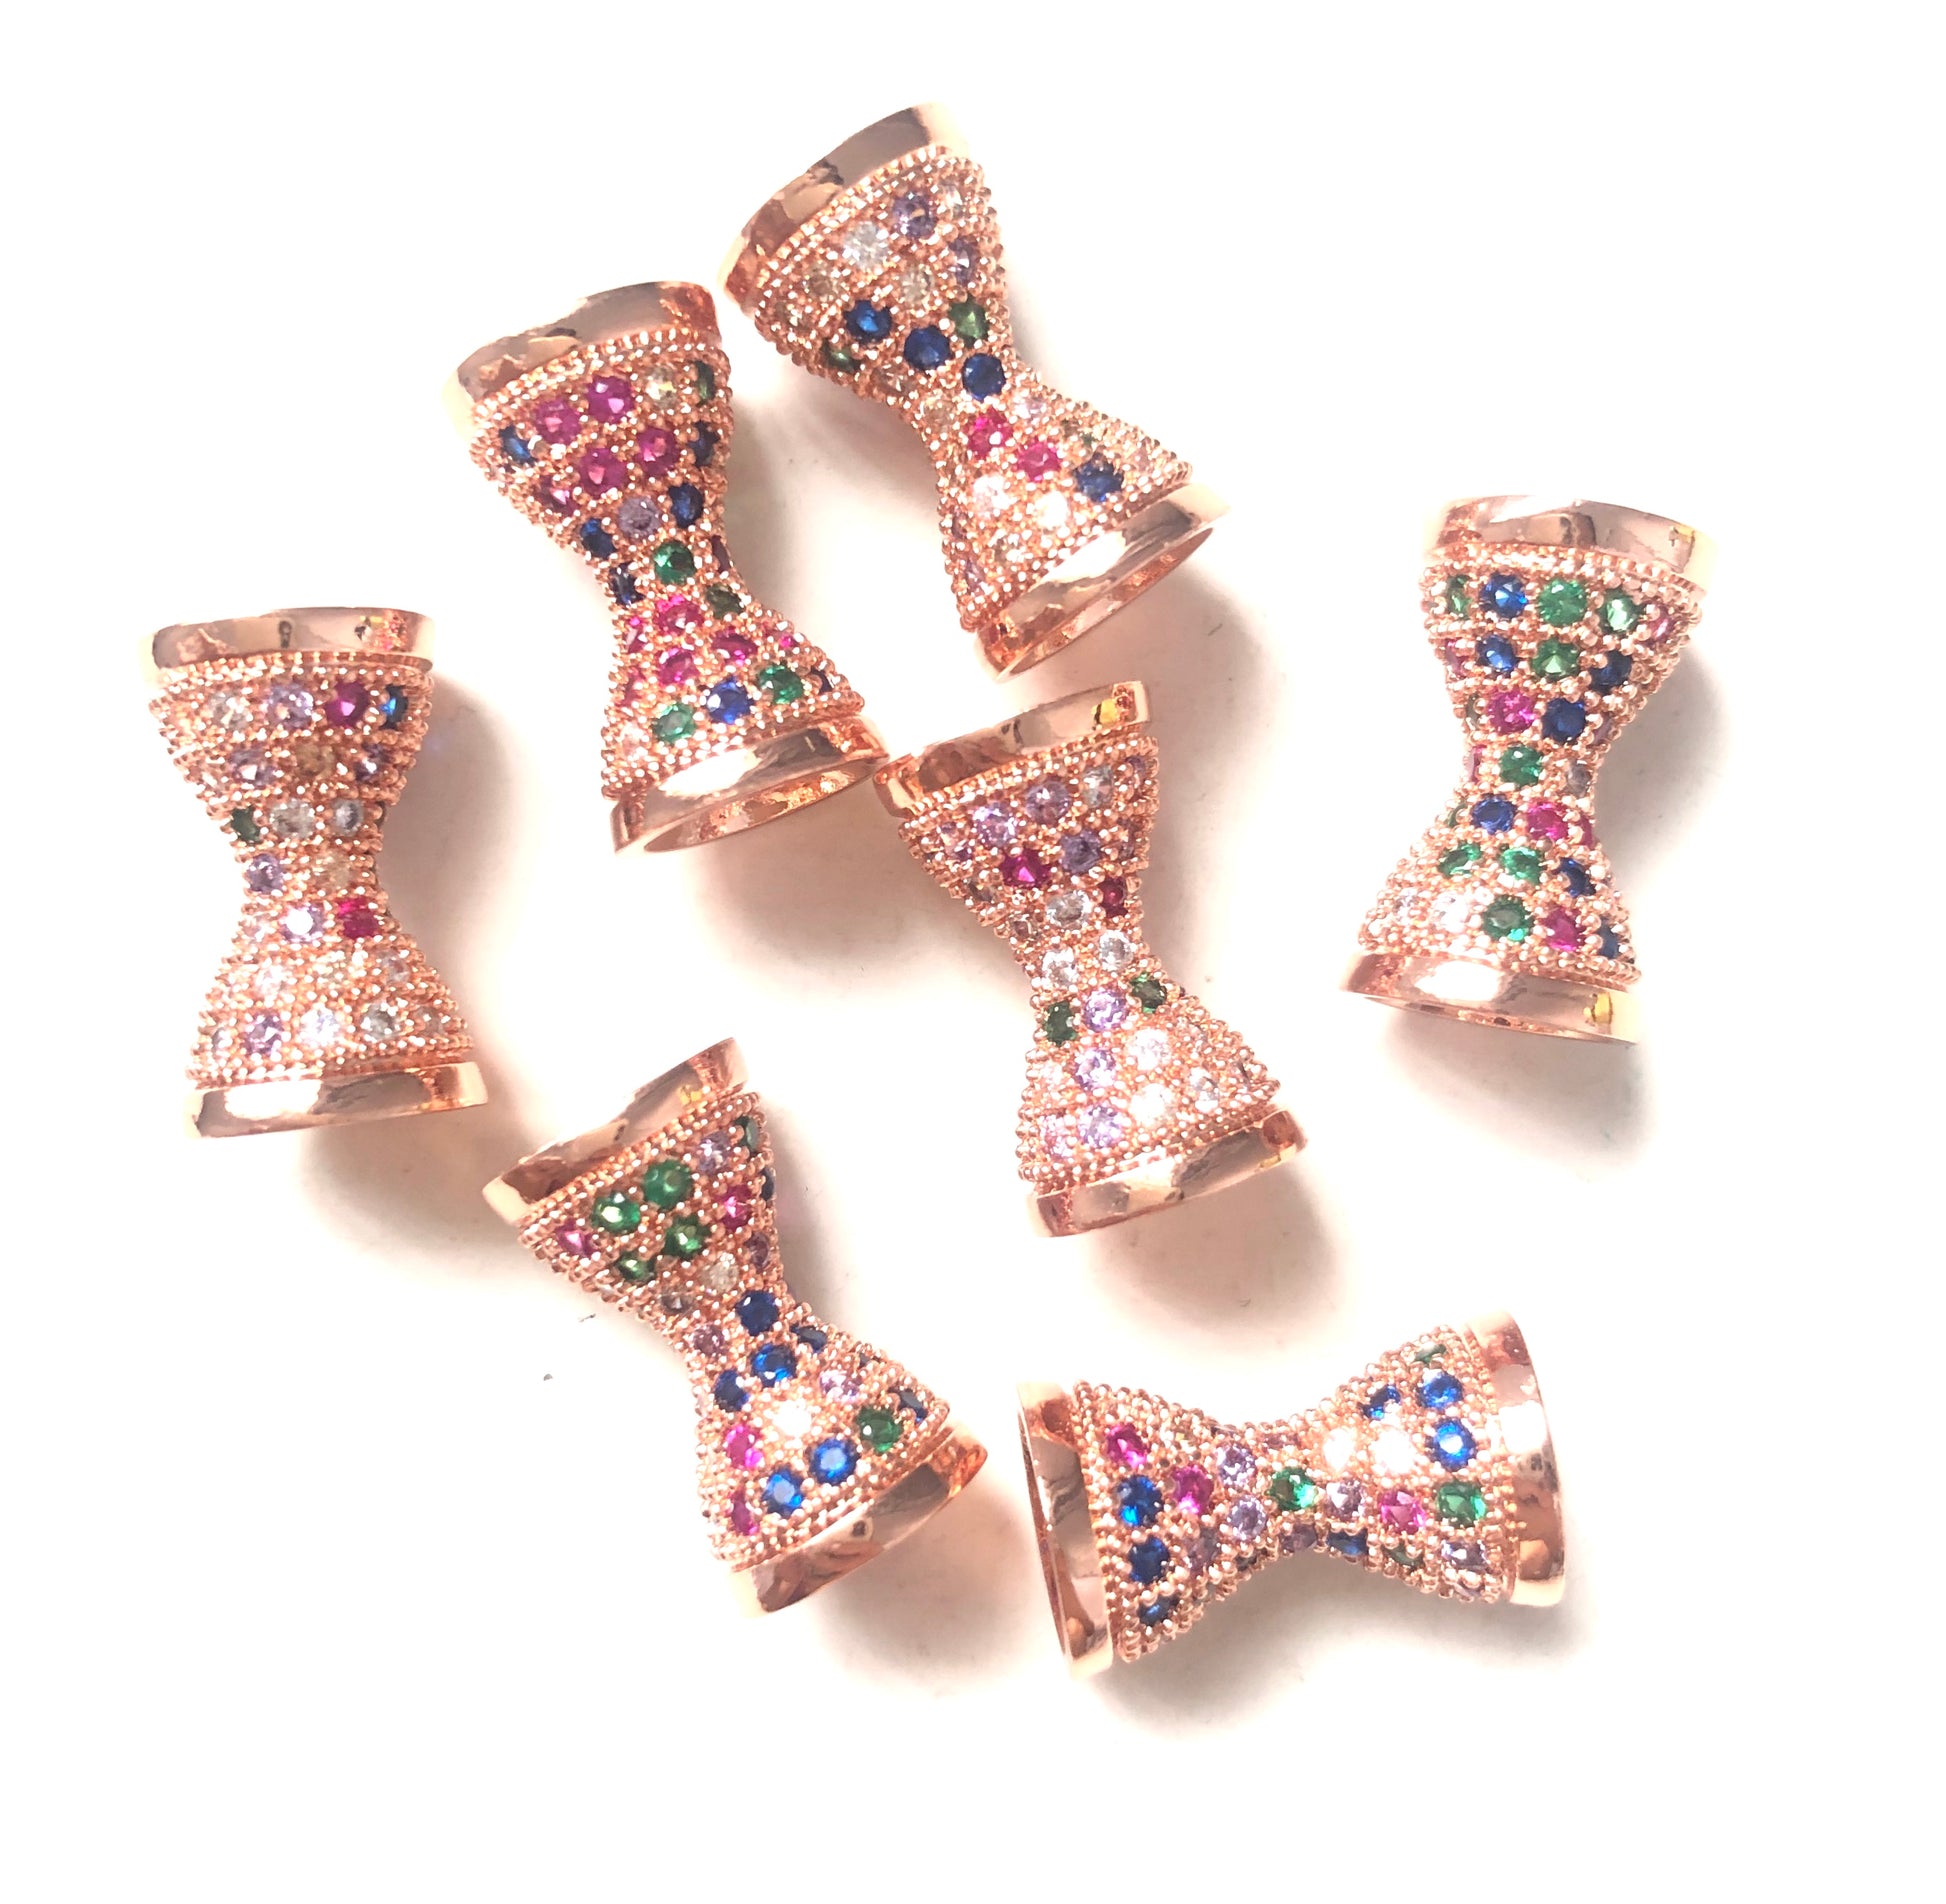 10pcs/lot 17.5*9.6mm Multicolor CZ Paved Hourglass Spacers Rose Gold CZ Paved Spacers Colorful Zirconia Hourglass Beads Charms Beads Beyond